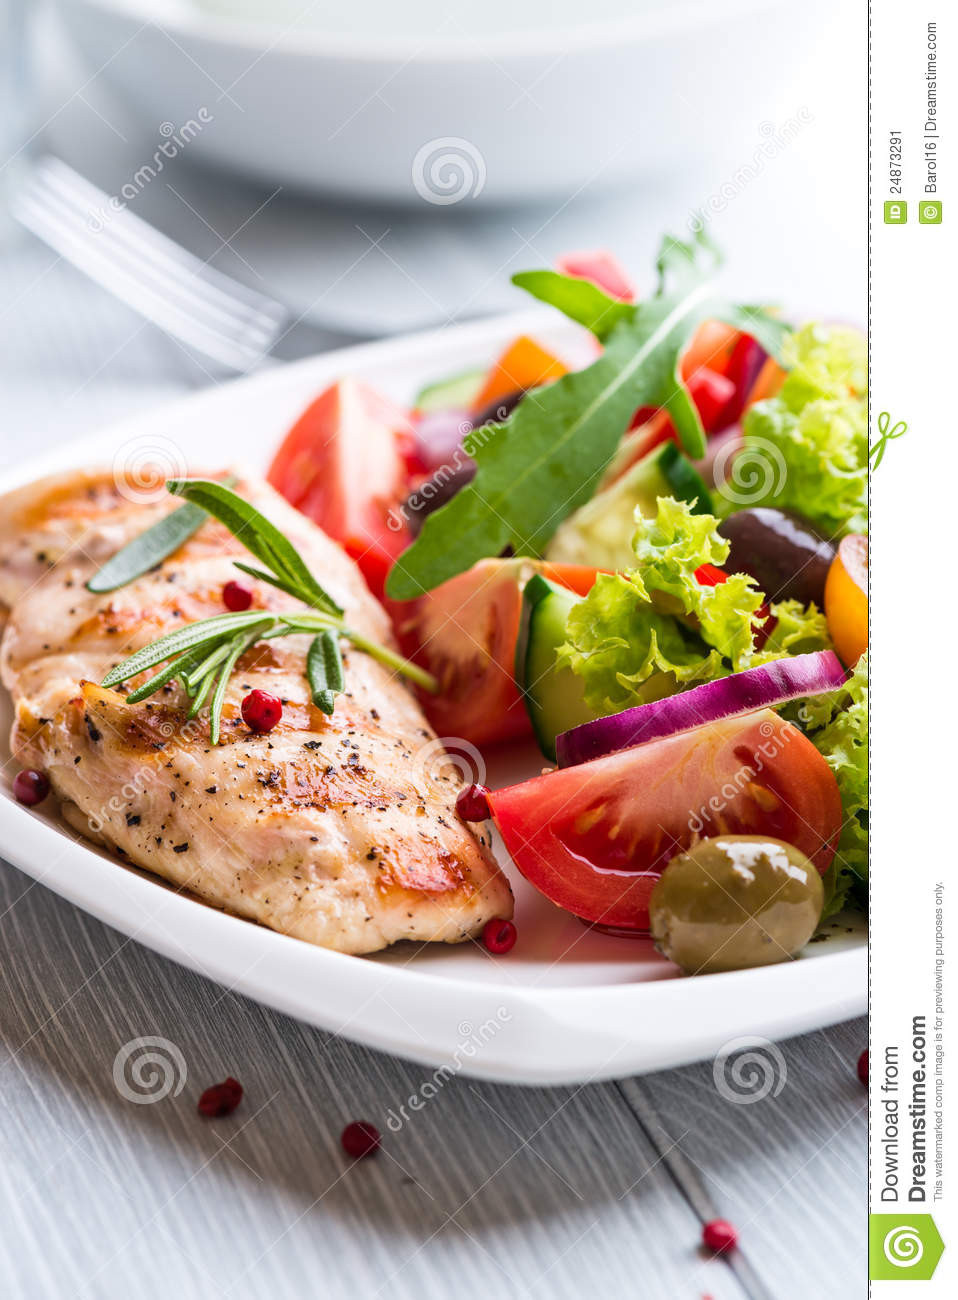 Chicken Breast Salad
 Grilled Chicken Breast With Salad Stock Image Image